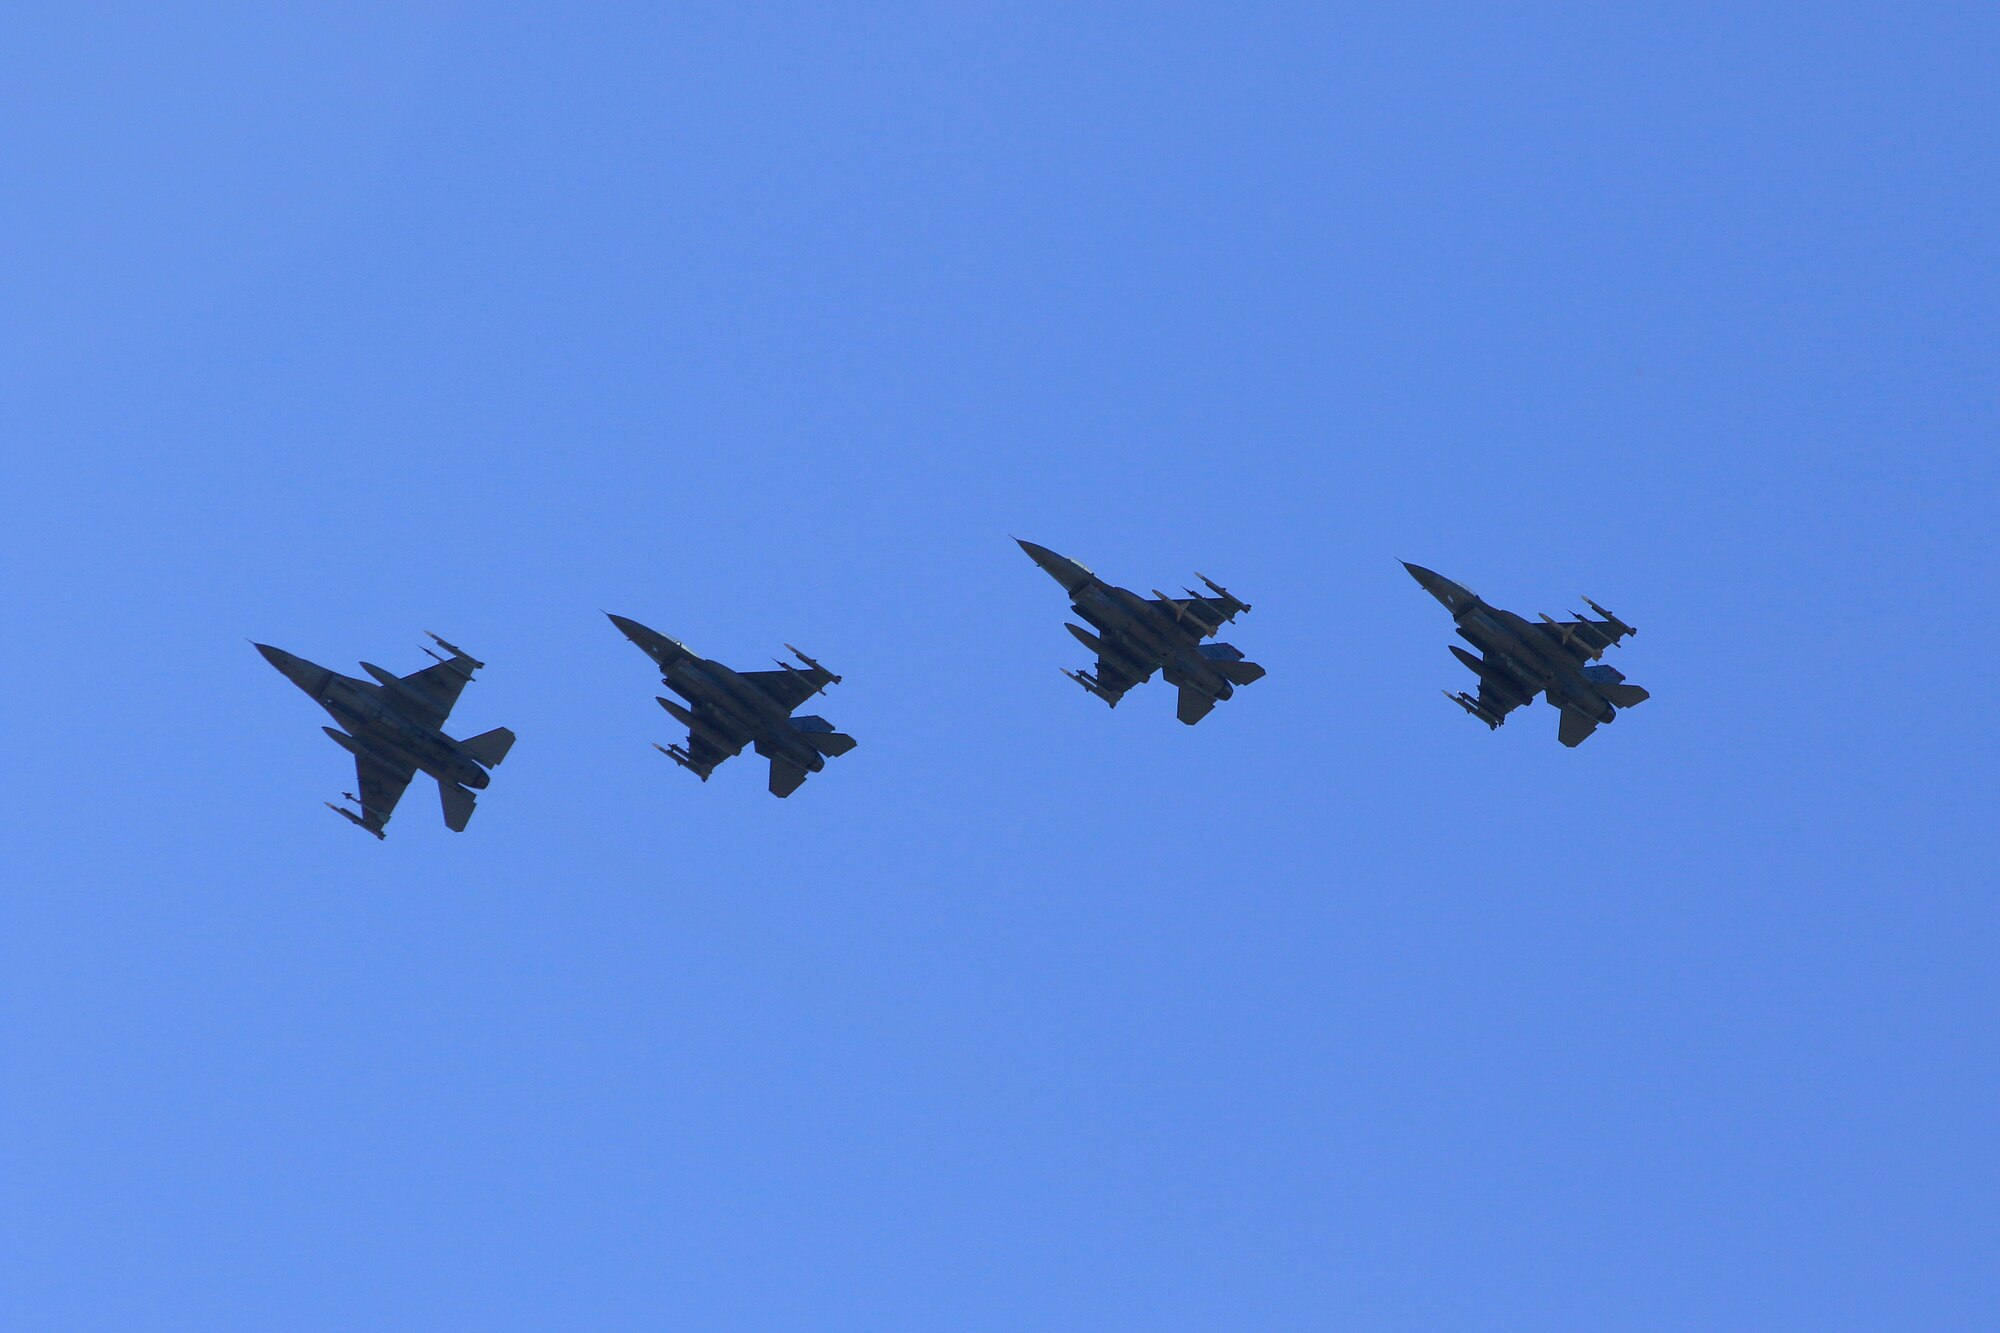 U.S. Air Force F-16 Fighting Falcons assigned to the 52nd Fighter Wing at Spangdahlem Air Base, Germany, fly in a formation during an Agile Combat Employment exercise over Büchel Air Base, Germany, June 25, 2020. Pilots from the 480th Fighter Squadron landed the F-16s at Büchel AB, where NATO partners aided in the exercise by refueling their jets. (Photo courtesy of Büchel Air Base Public Affairs)